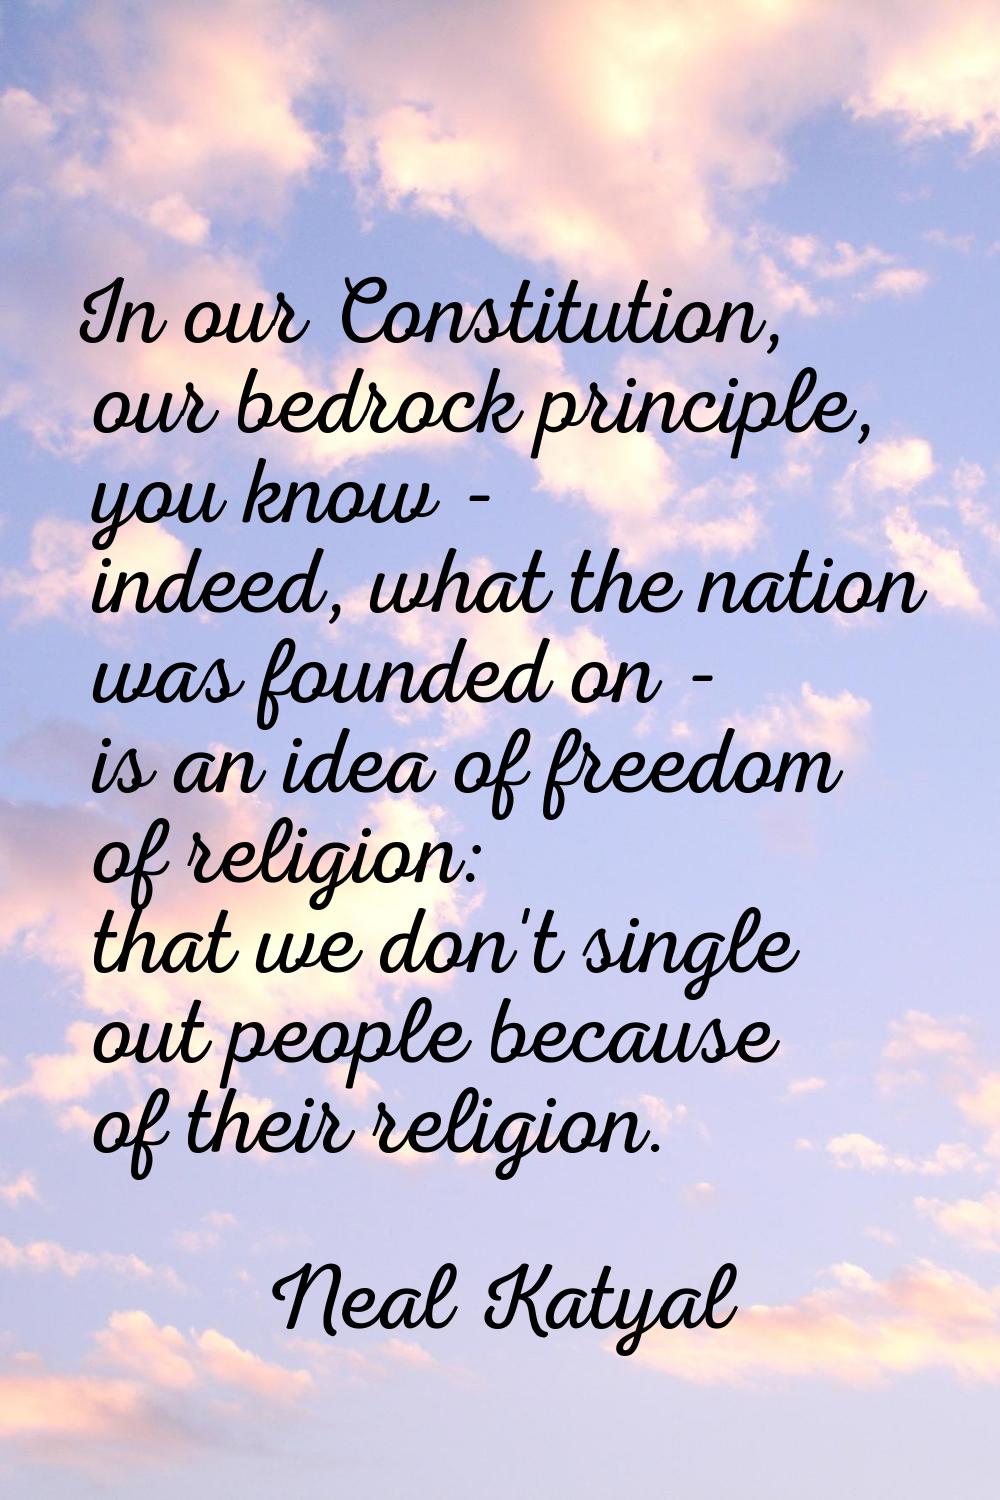 In our Constitution, our bedrock principle, you know - indeed, what the nation was founded on - is 